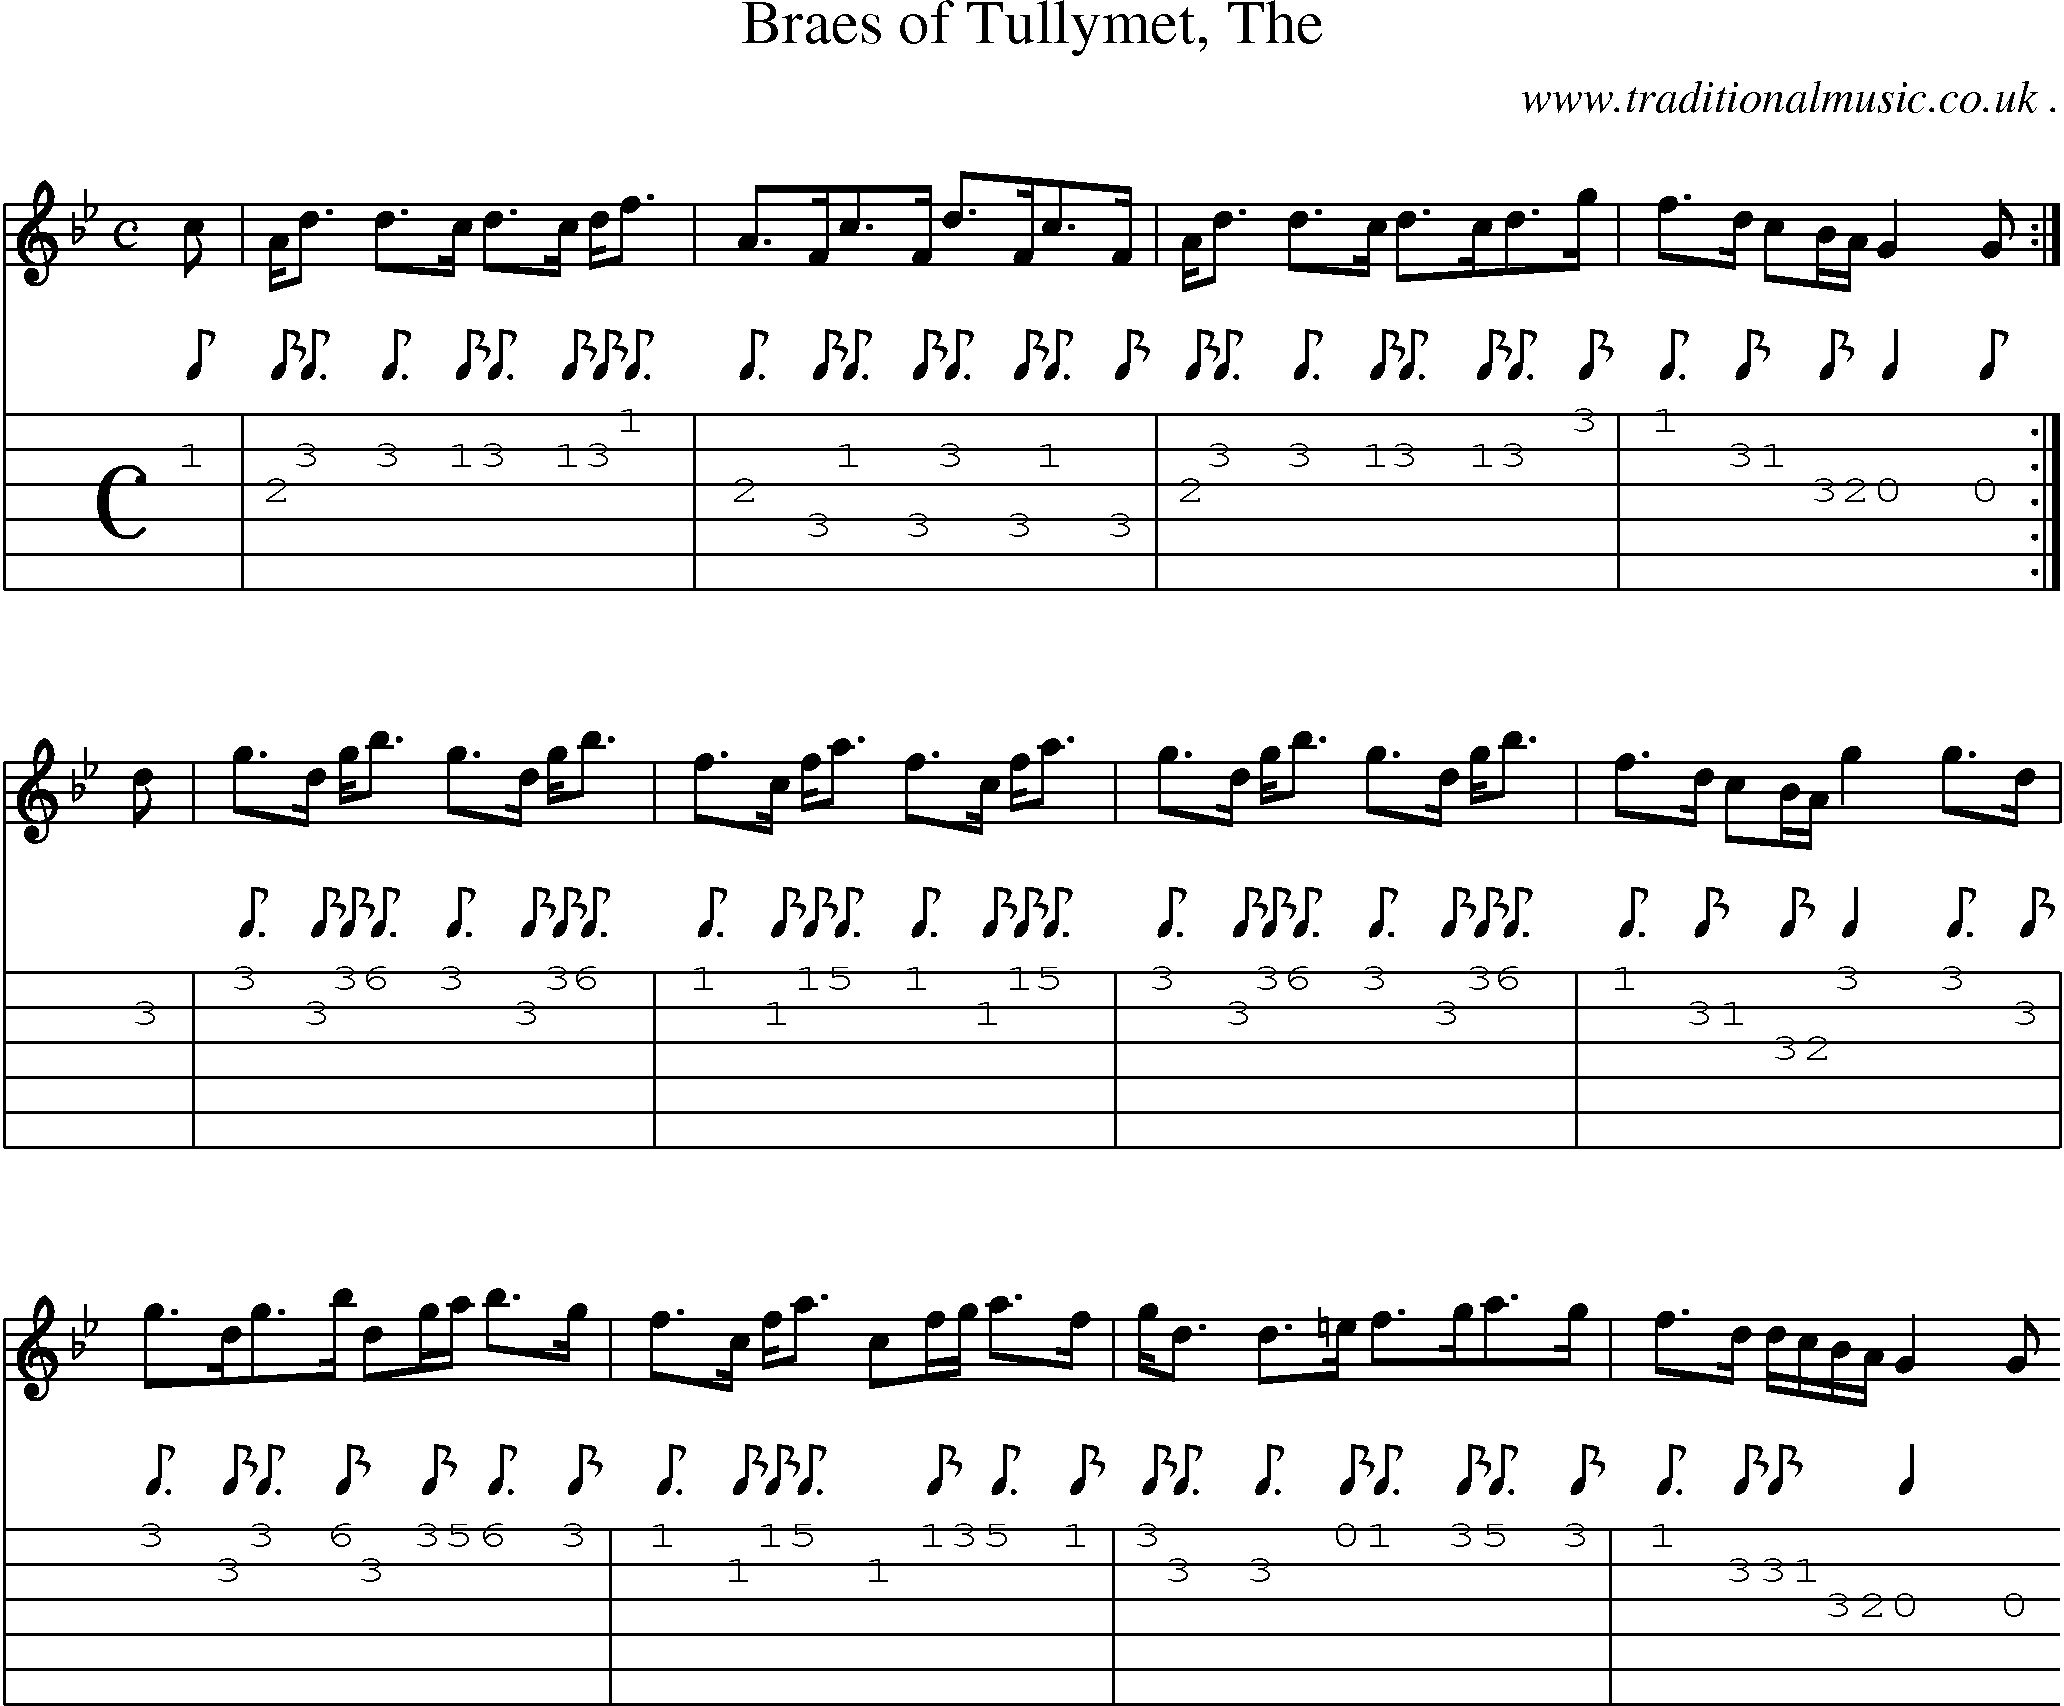 Sheet-music  score, Chords and Guitar Tabs for Braes Of Tullymet The